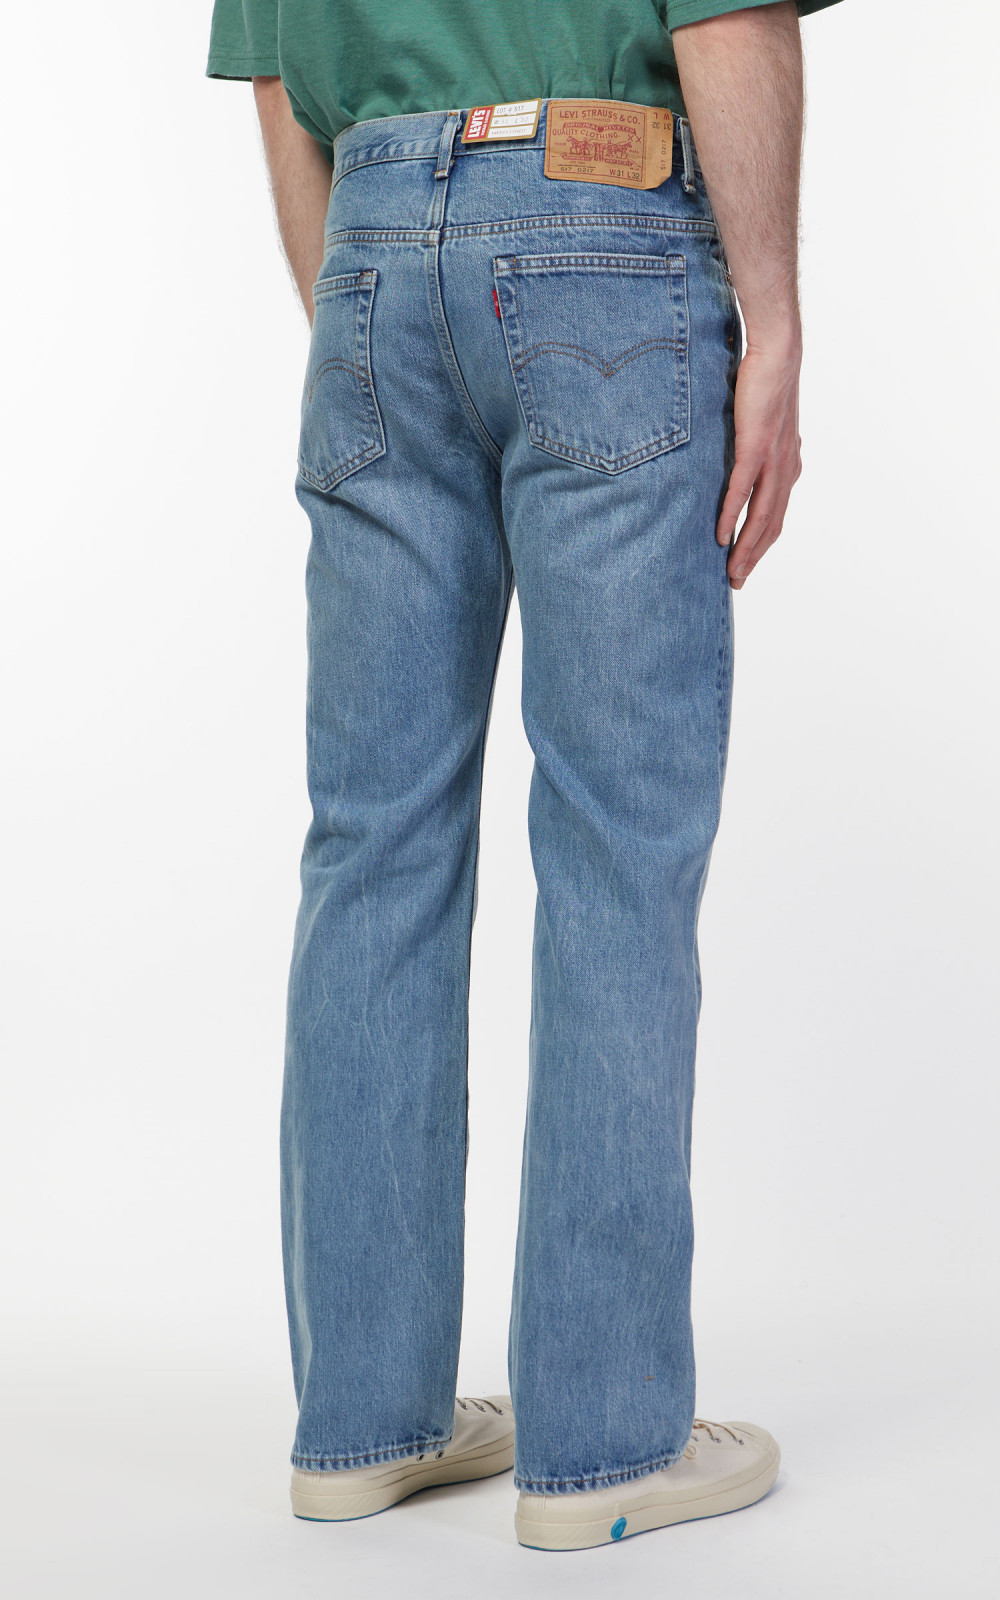 Levi's® Vintage Clothing 517 Bootcut Jeans First Sunrise | Cultizm